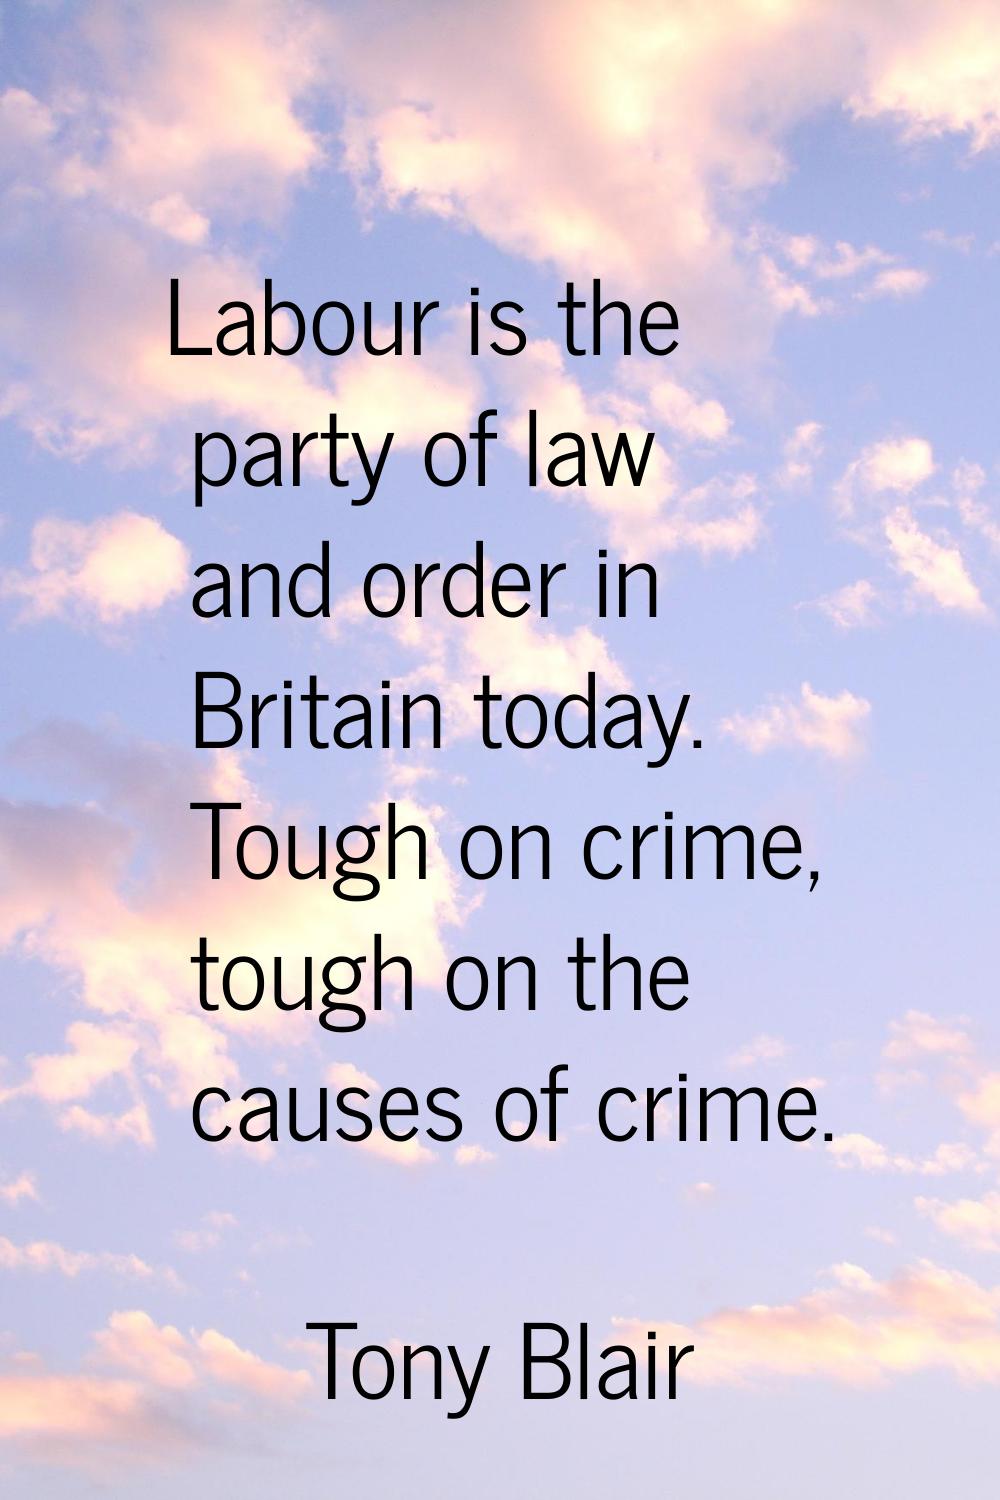 Labour is the party of law and order in Britain today. Tough on crime, tough on the causes of crime